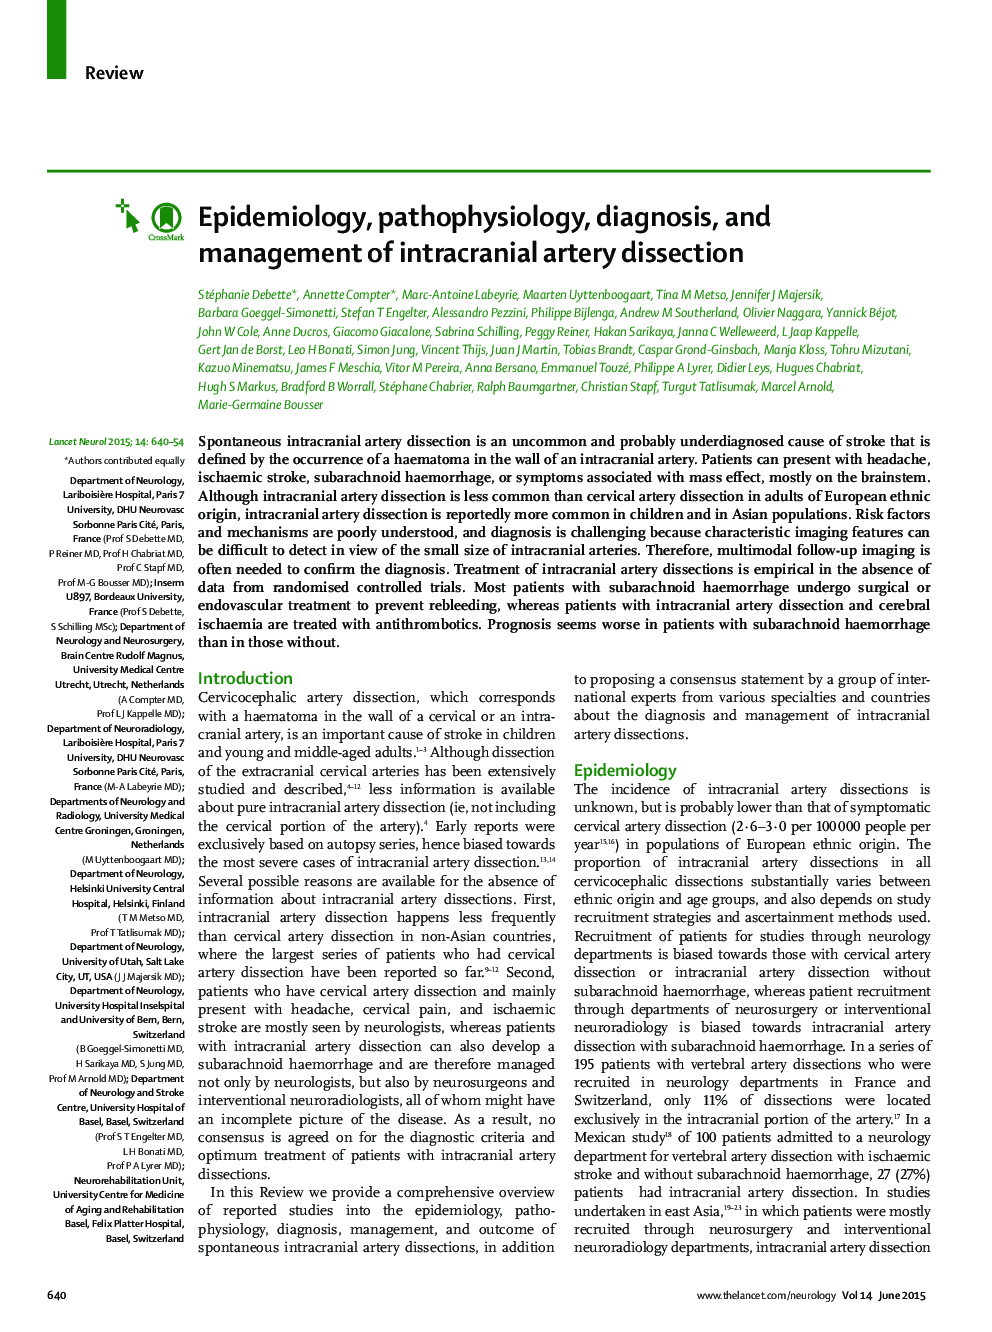 Epidemiology, pathophysiology, diagnosis, and management of intracranial artery dissection